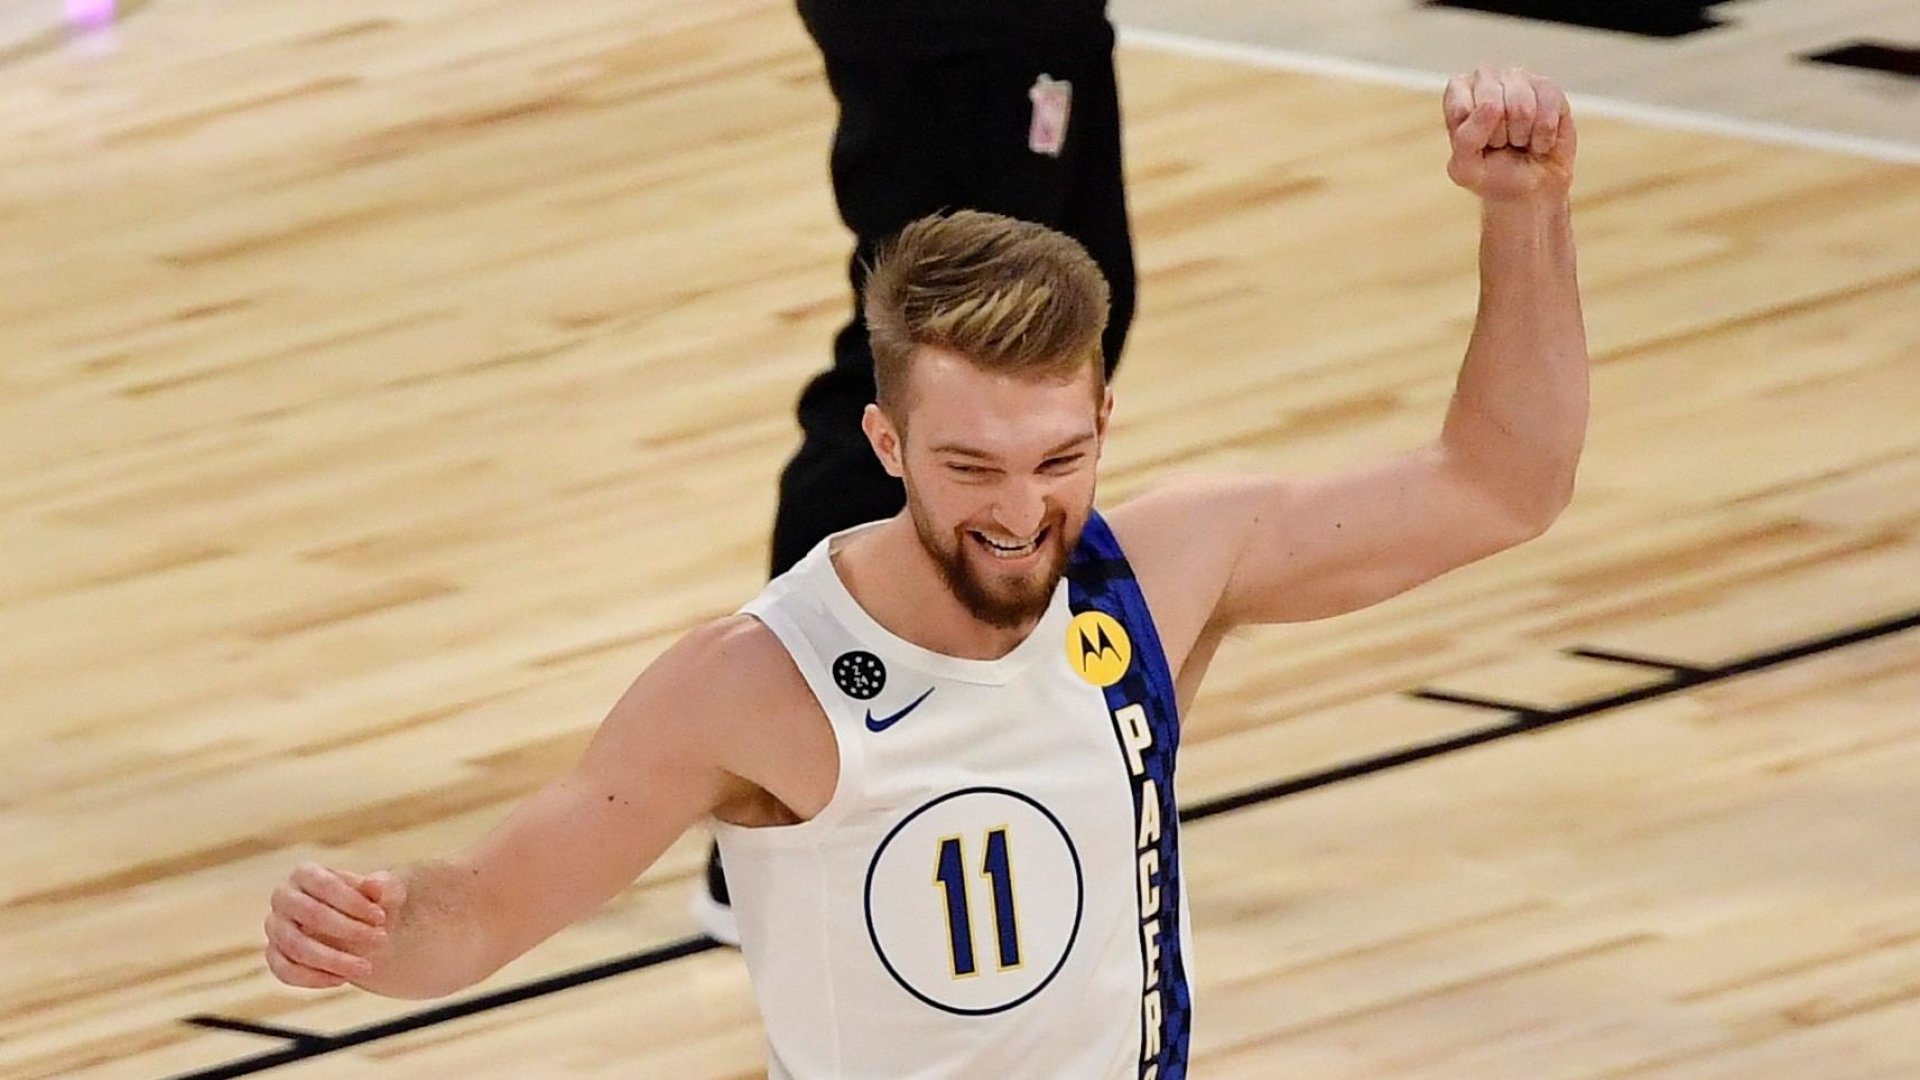 Domantas Sabonis on the All-Star Game: “The NBA is in charge” - Eurohoops